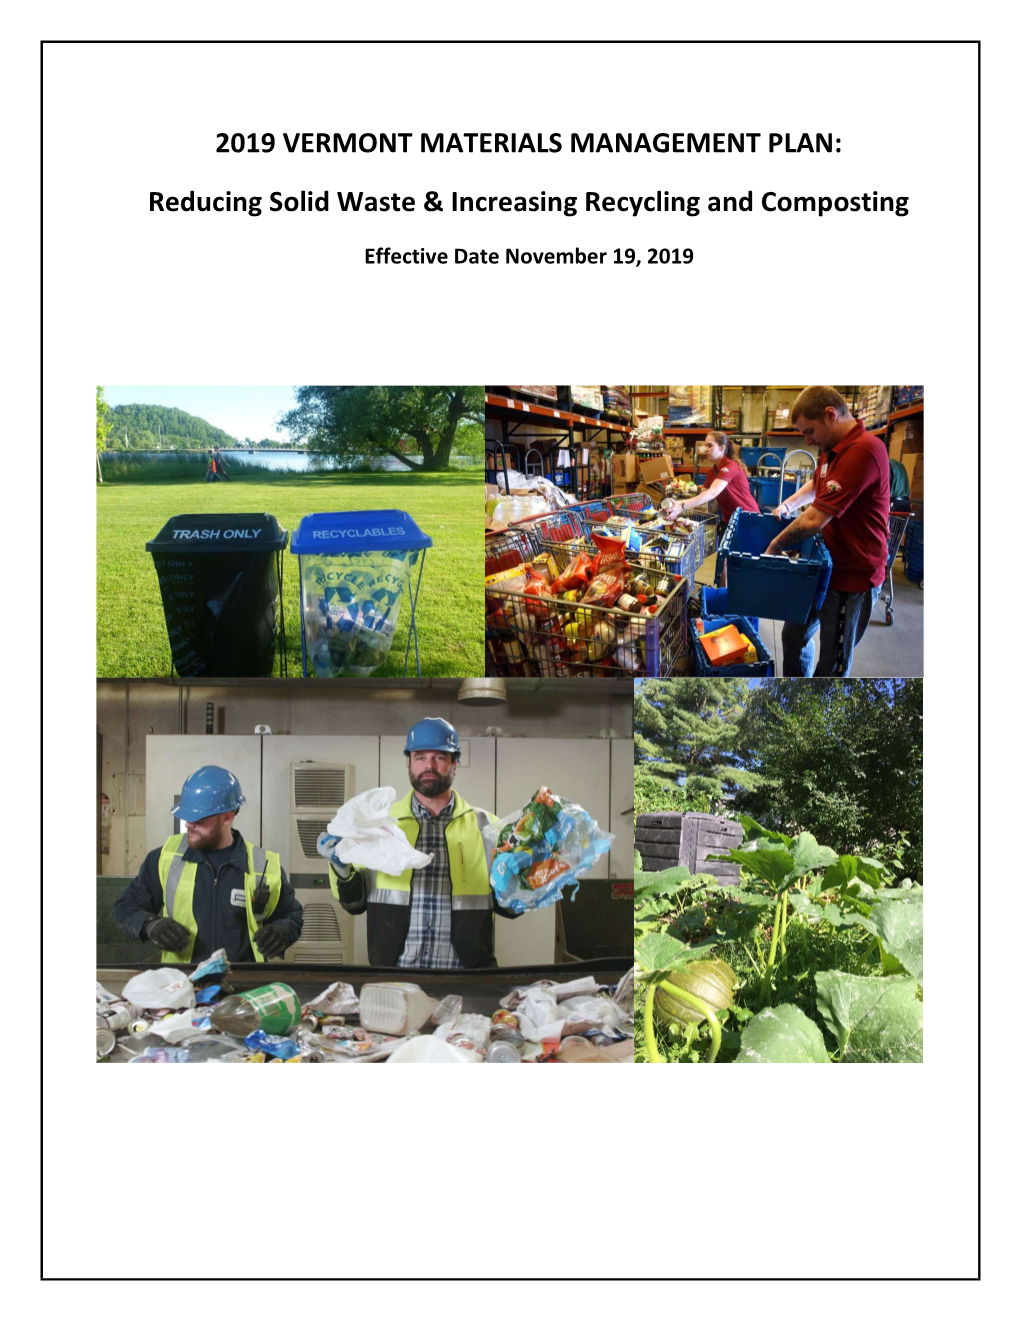 Reducing Solid Waste & Increasing Recycling and Composting